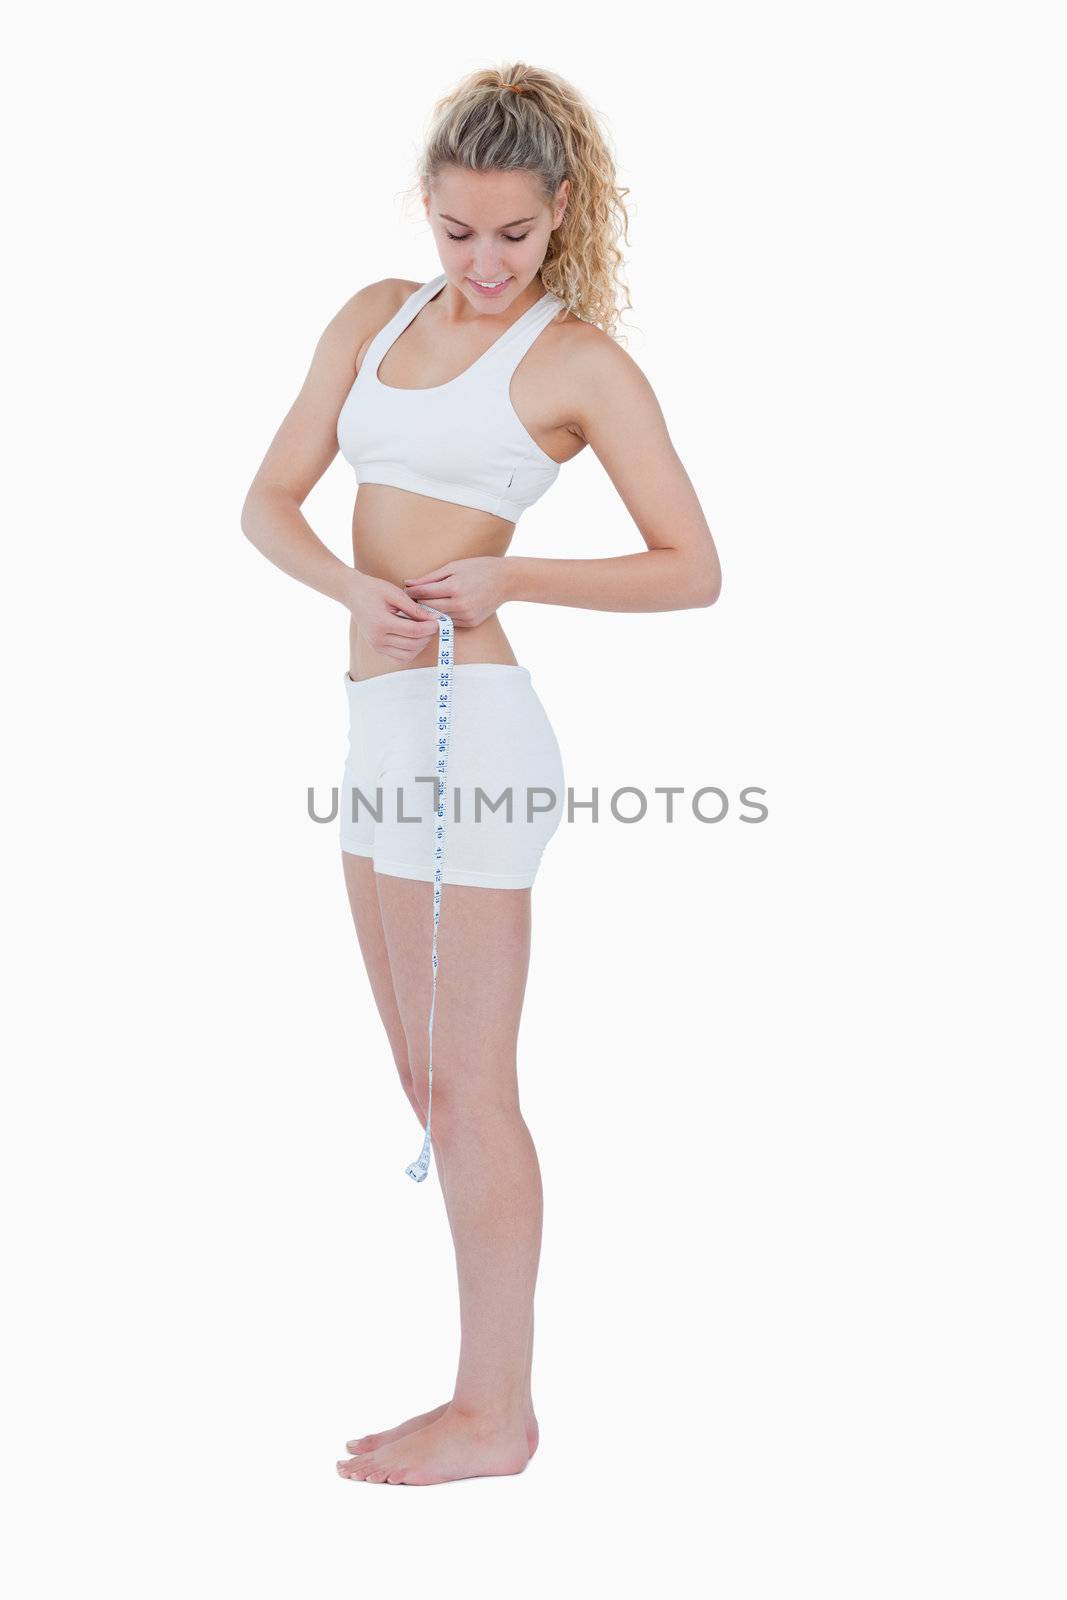 Young woman looking at her measuring tape against a white background